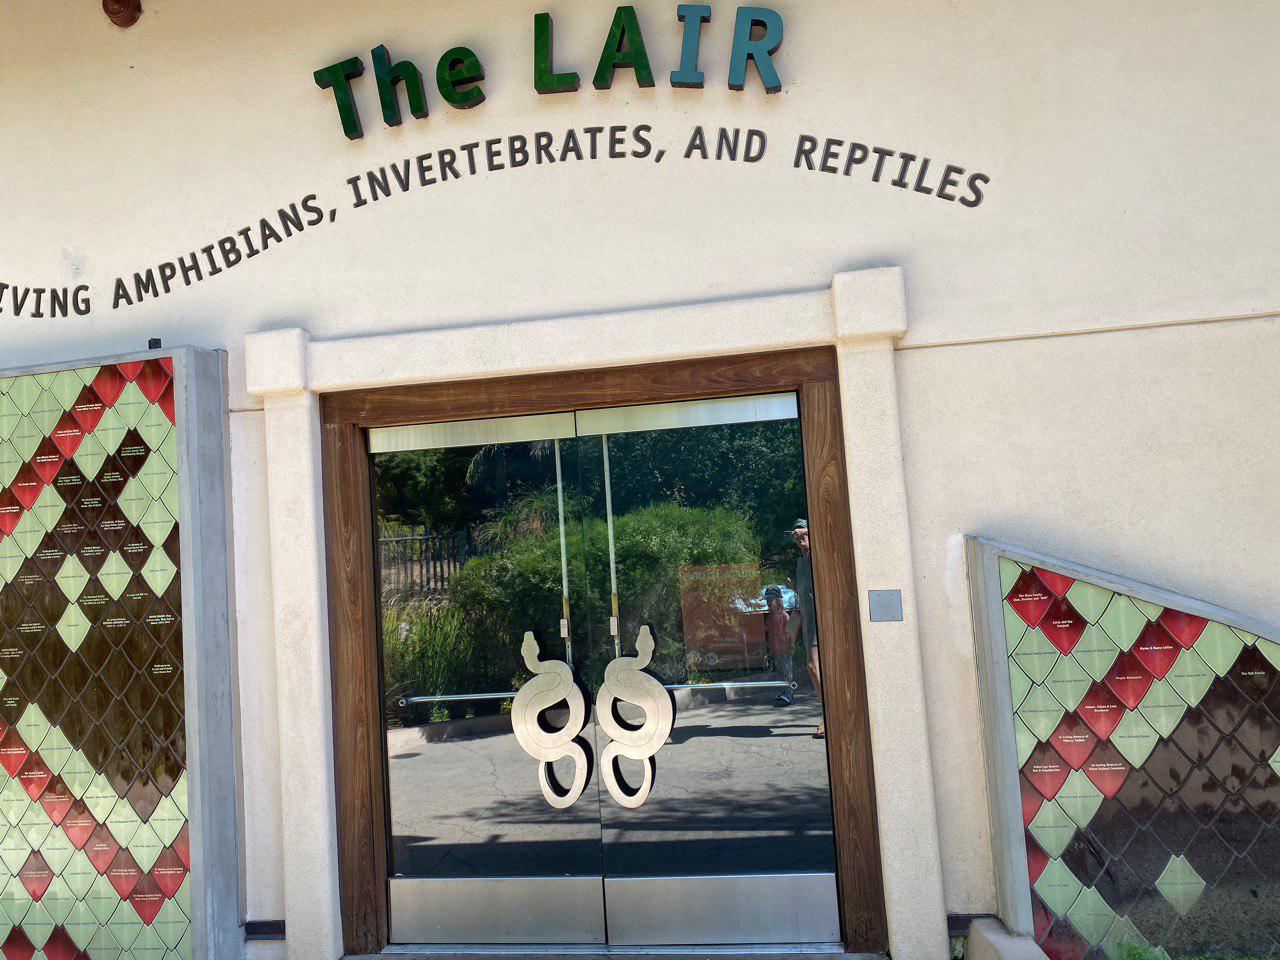 Los Angeles Zoo the Lair 2019